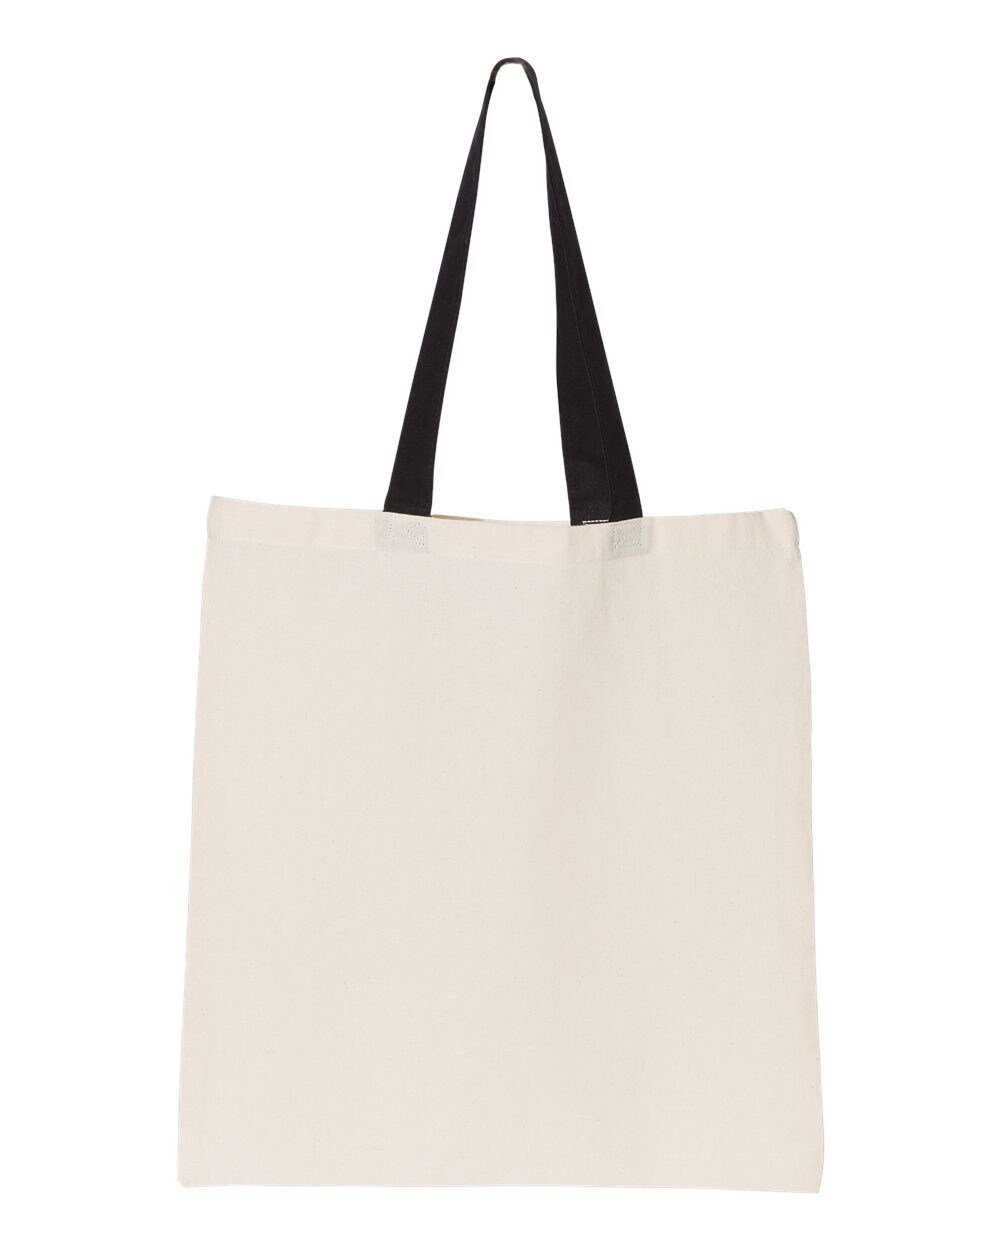 Purchase the Artist's Loft™ Fundamentals Tote Bag at Michaels